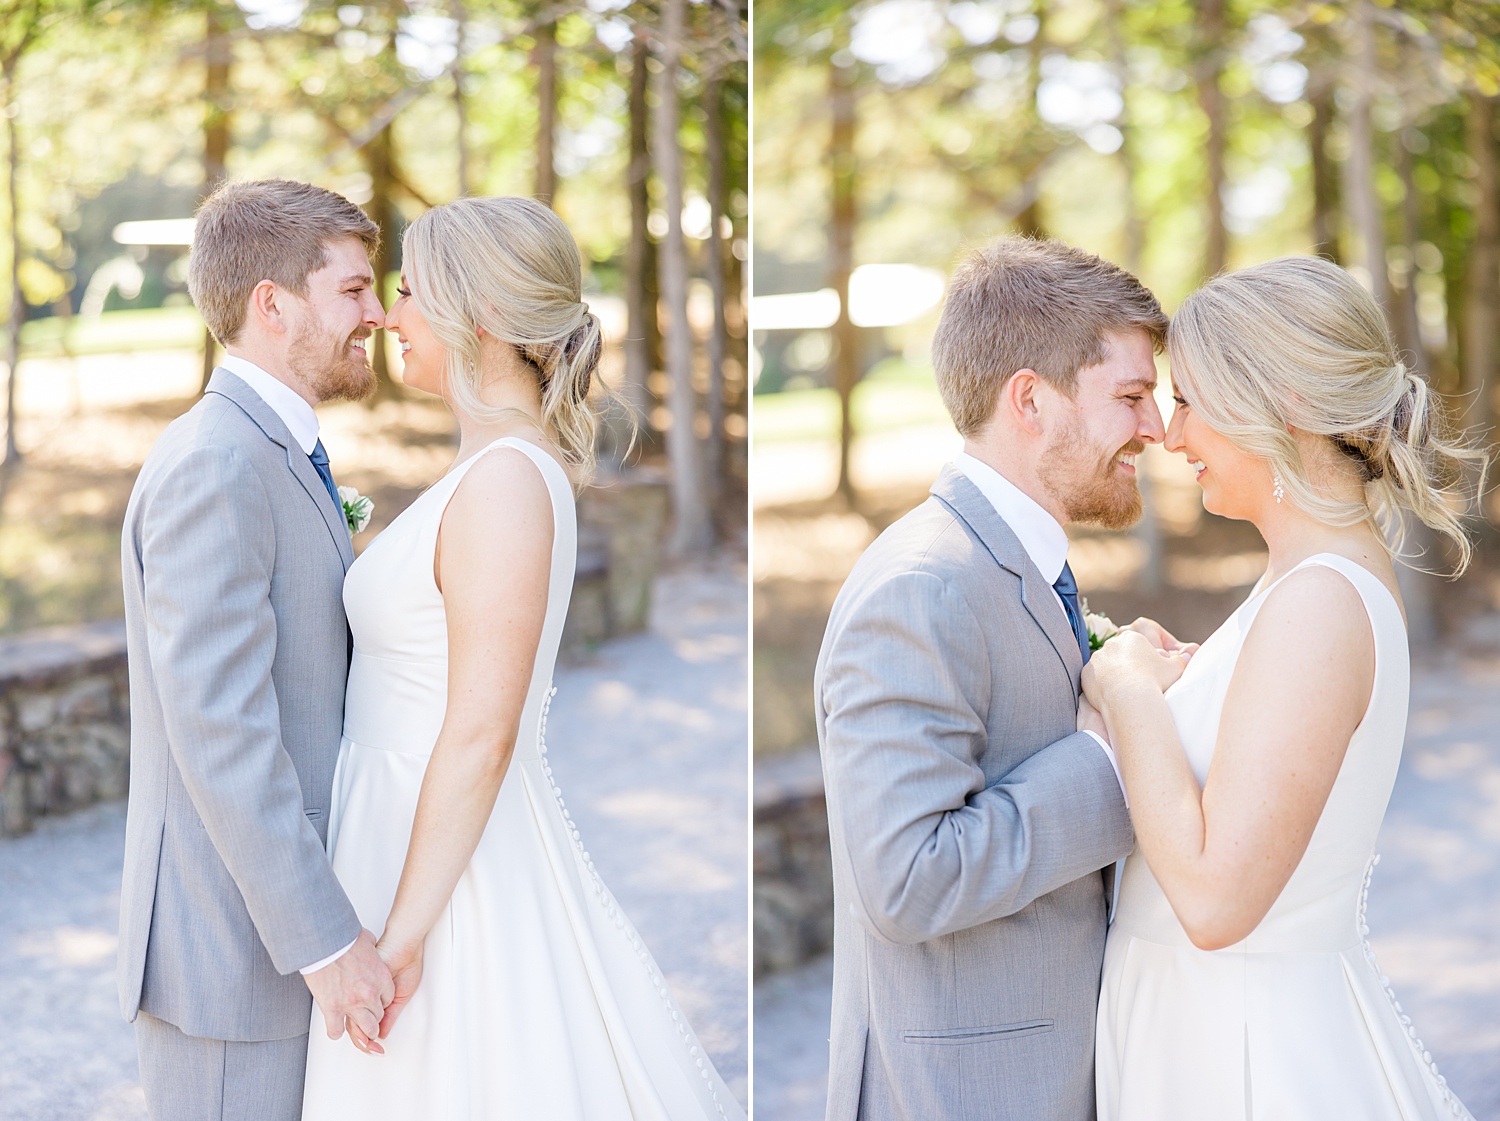 bride and groom share intimate moment before wedding ceremony 